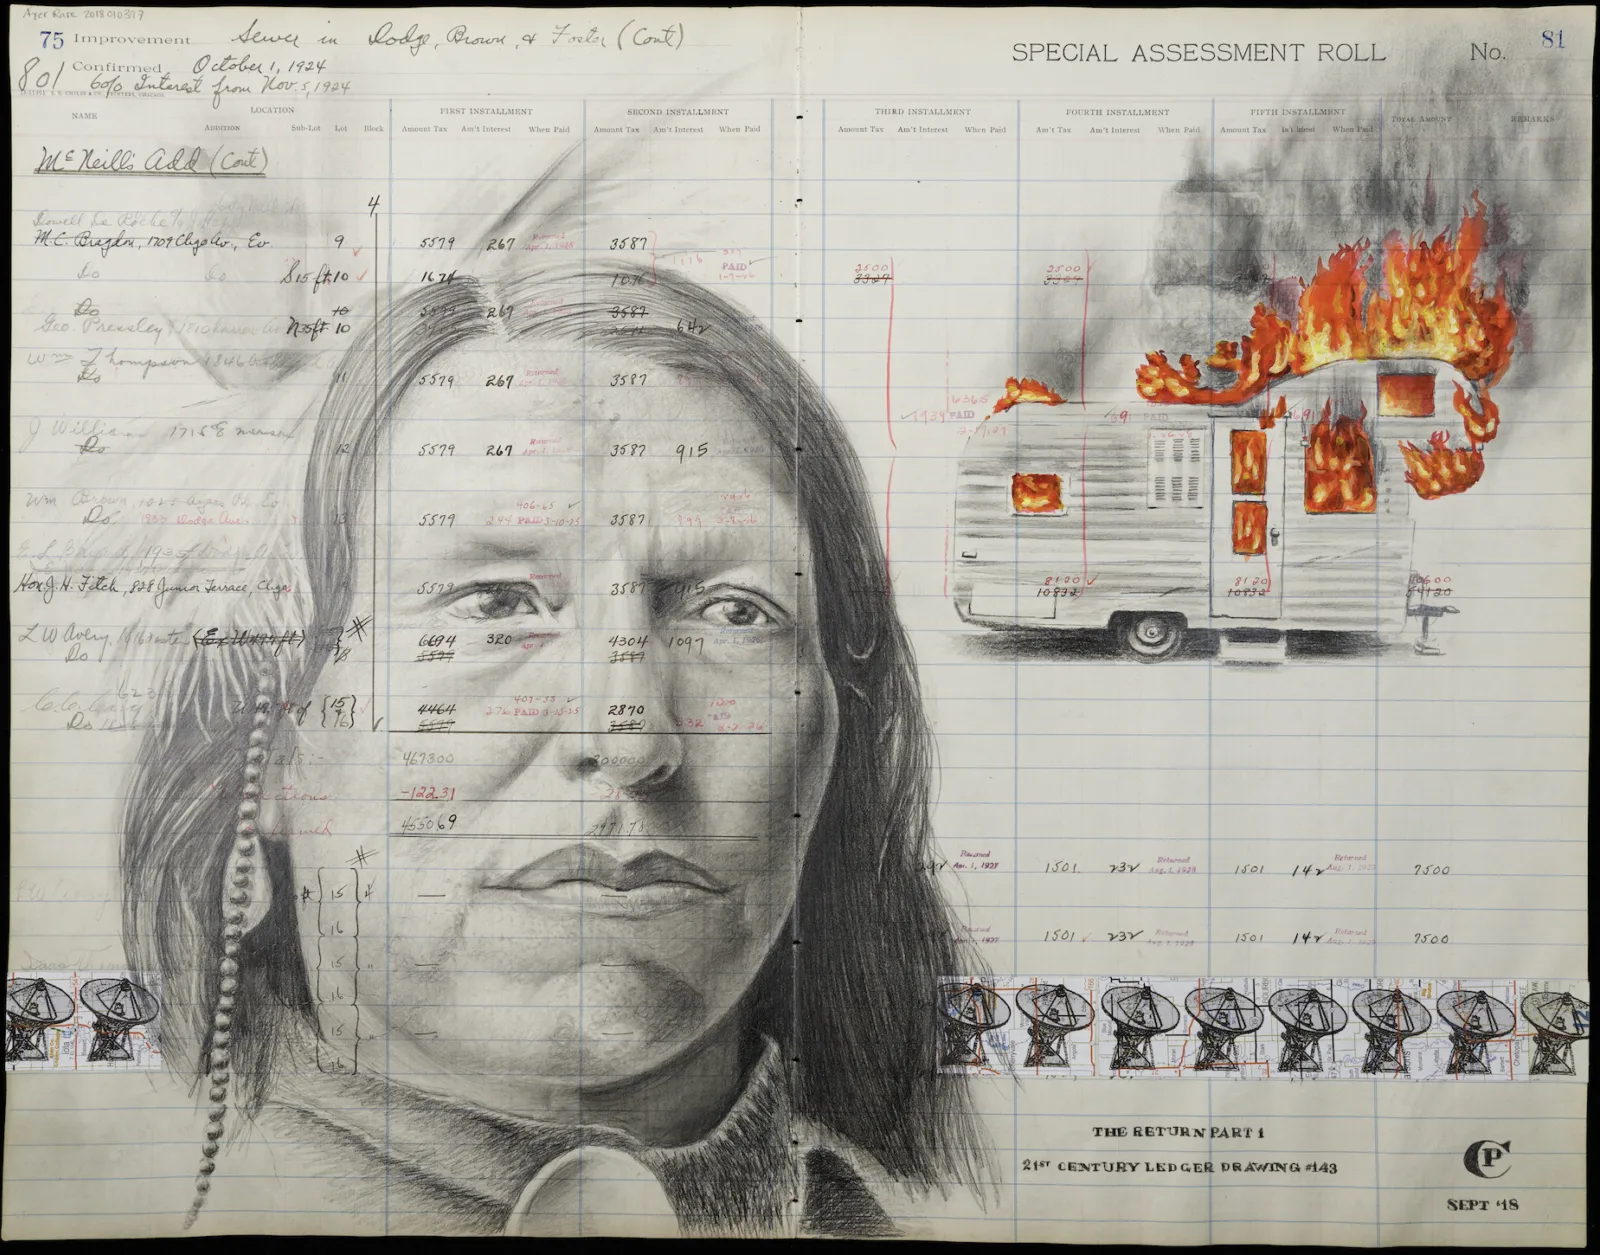 A portrait of a Native man on ledger paper. Behind him is a burning trailer.